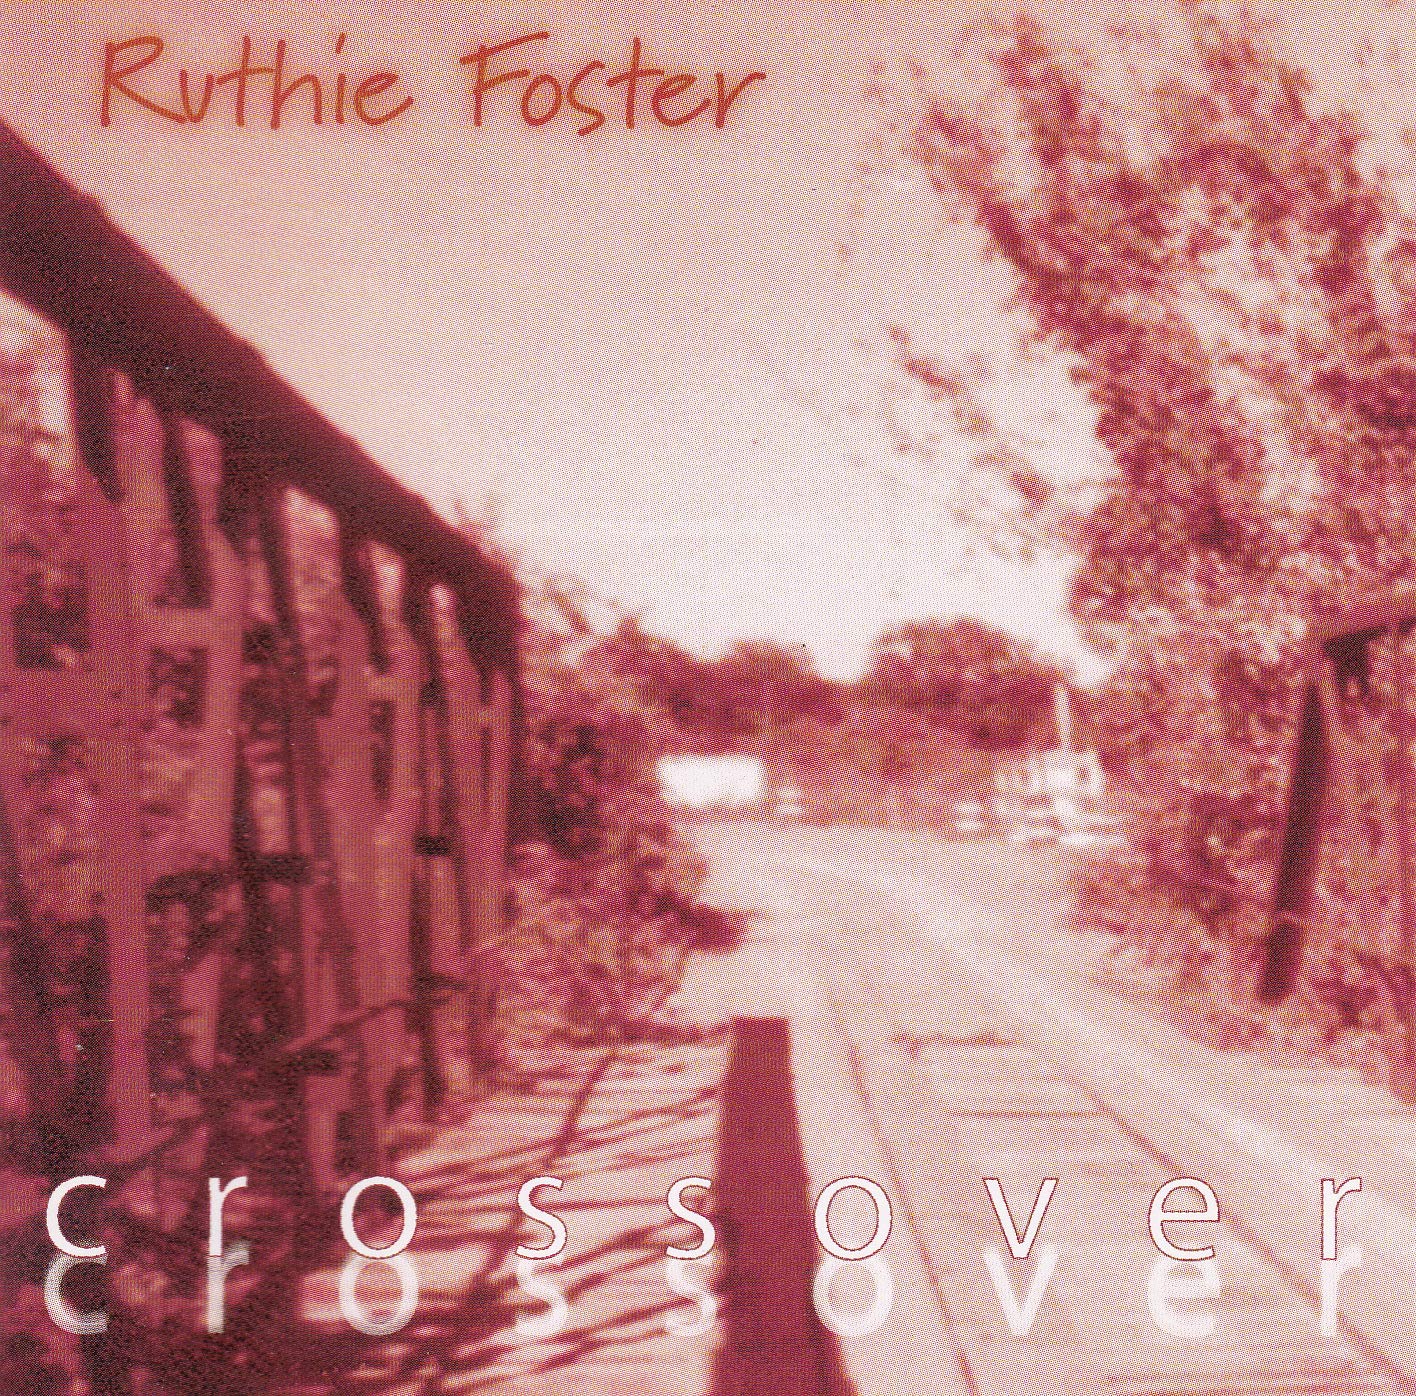 Ruthie Foster- Crossover